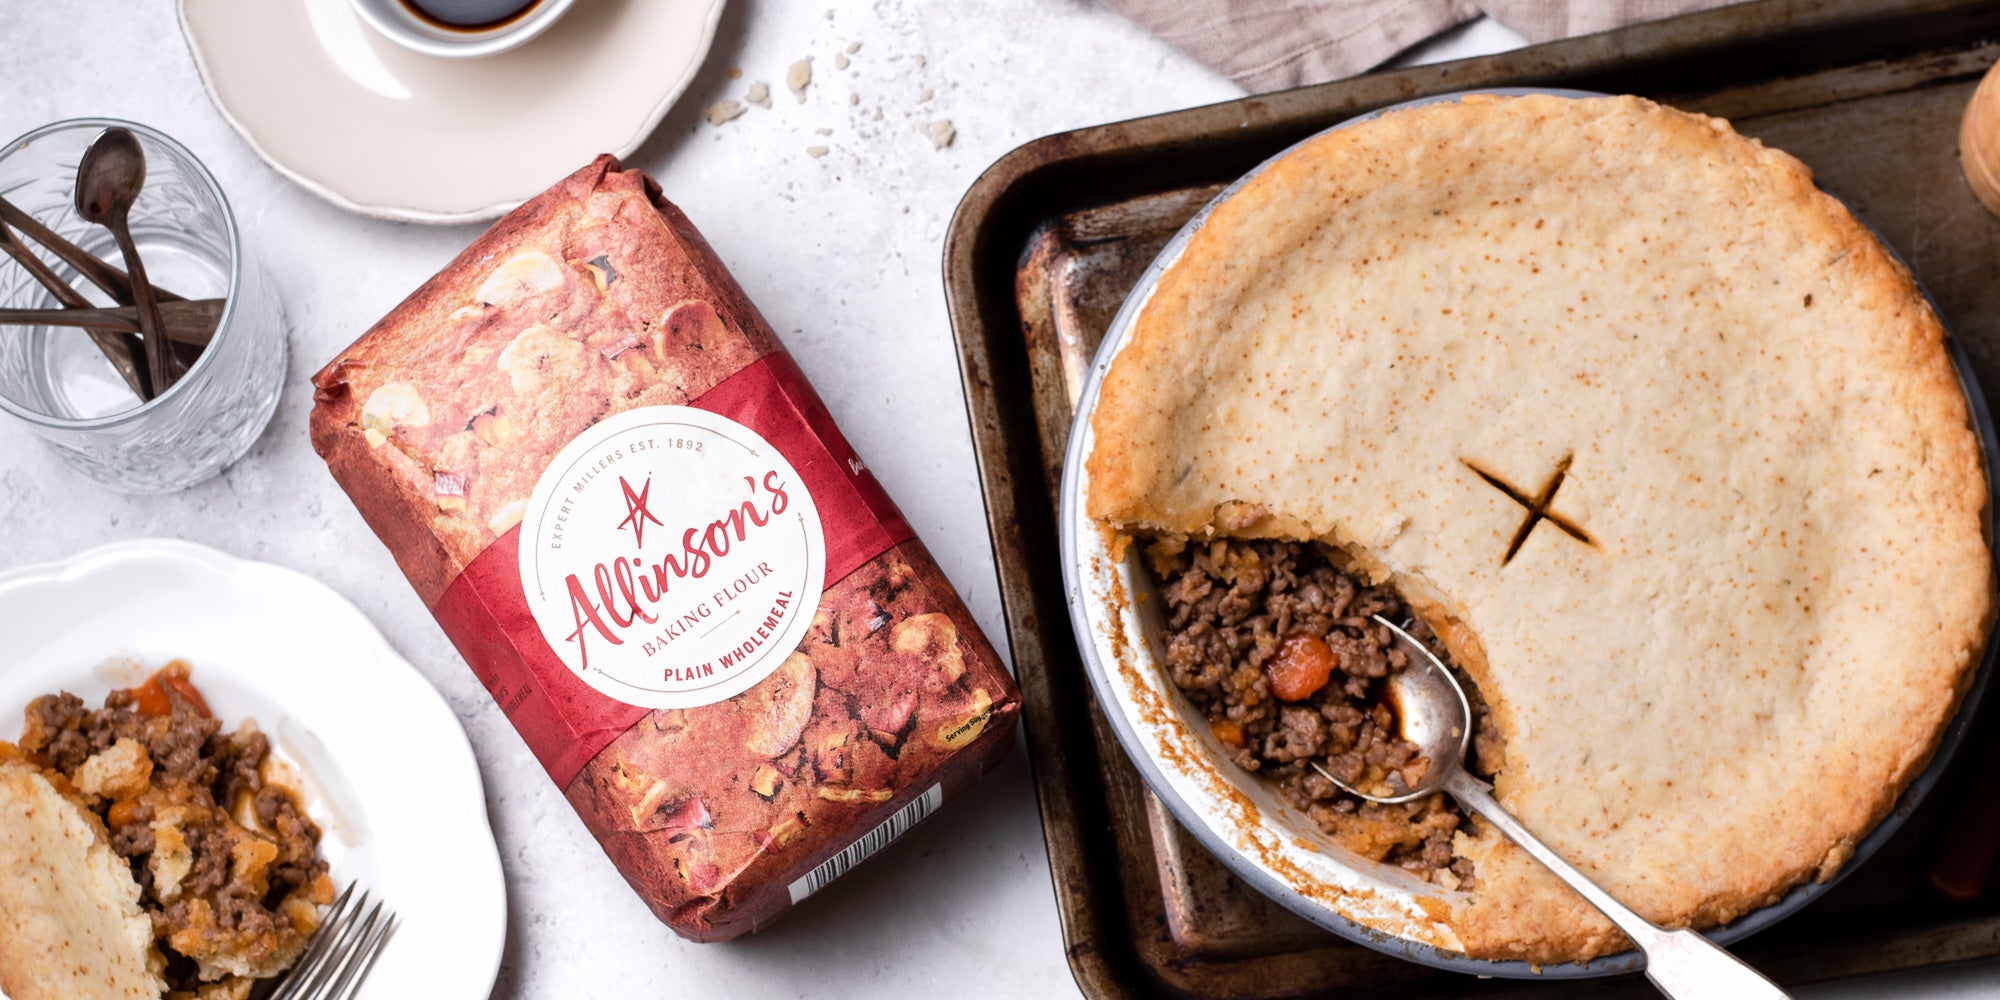 Suet Crusted Beef & Onion Pie on a baking tray, with a spoon serving some of the pie filling. Next to a bag of Allinson's Plain Wholemeal flour and a plate with a serving of pie.